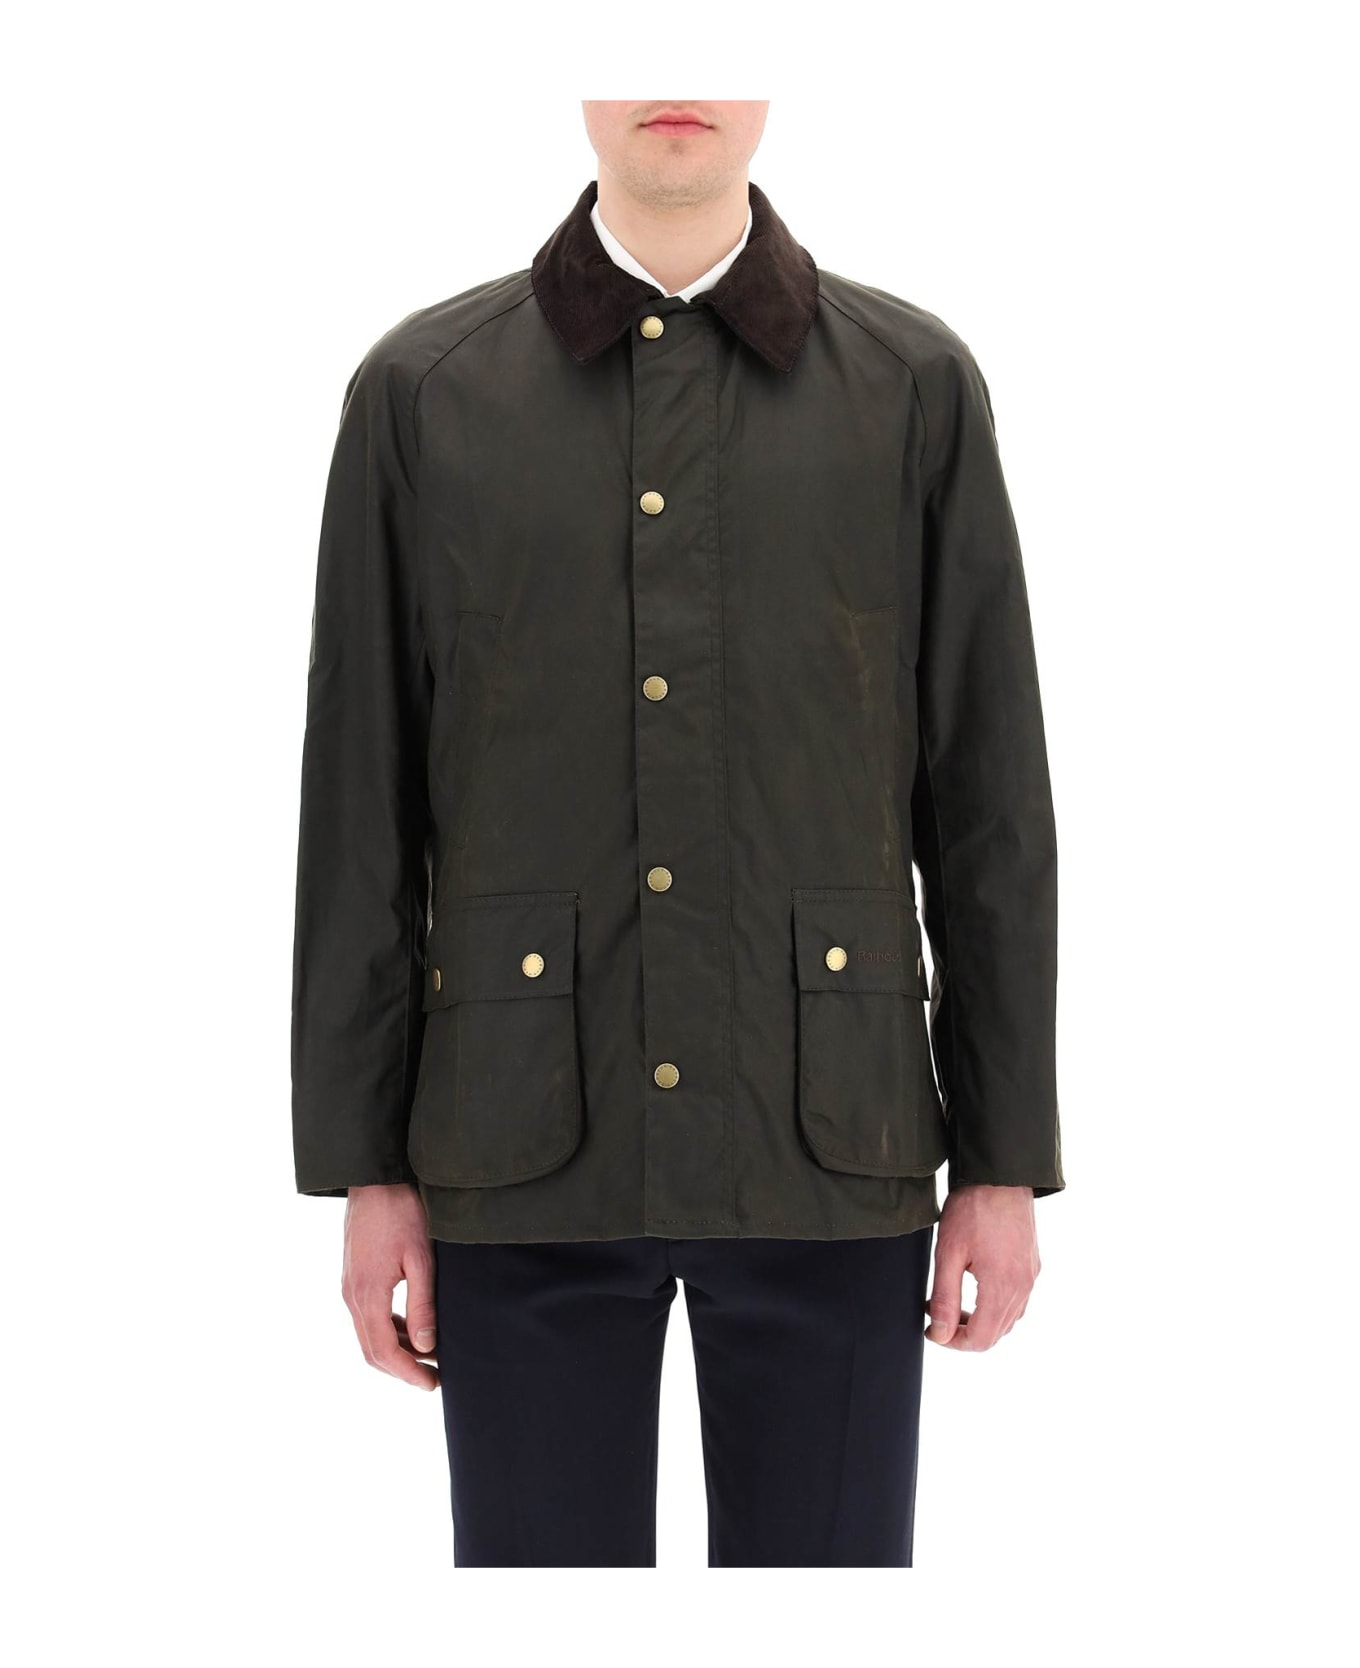 Barbour Ashby Waxed Jacket Barbour - GREEN コート